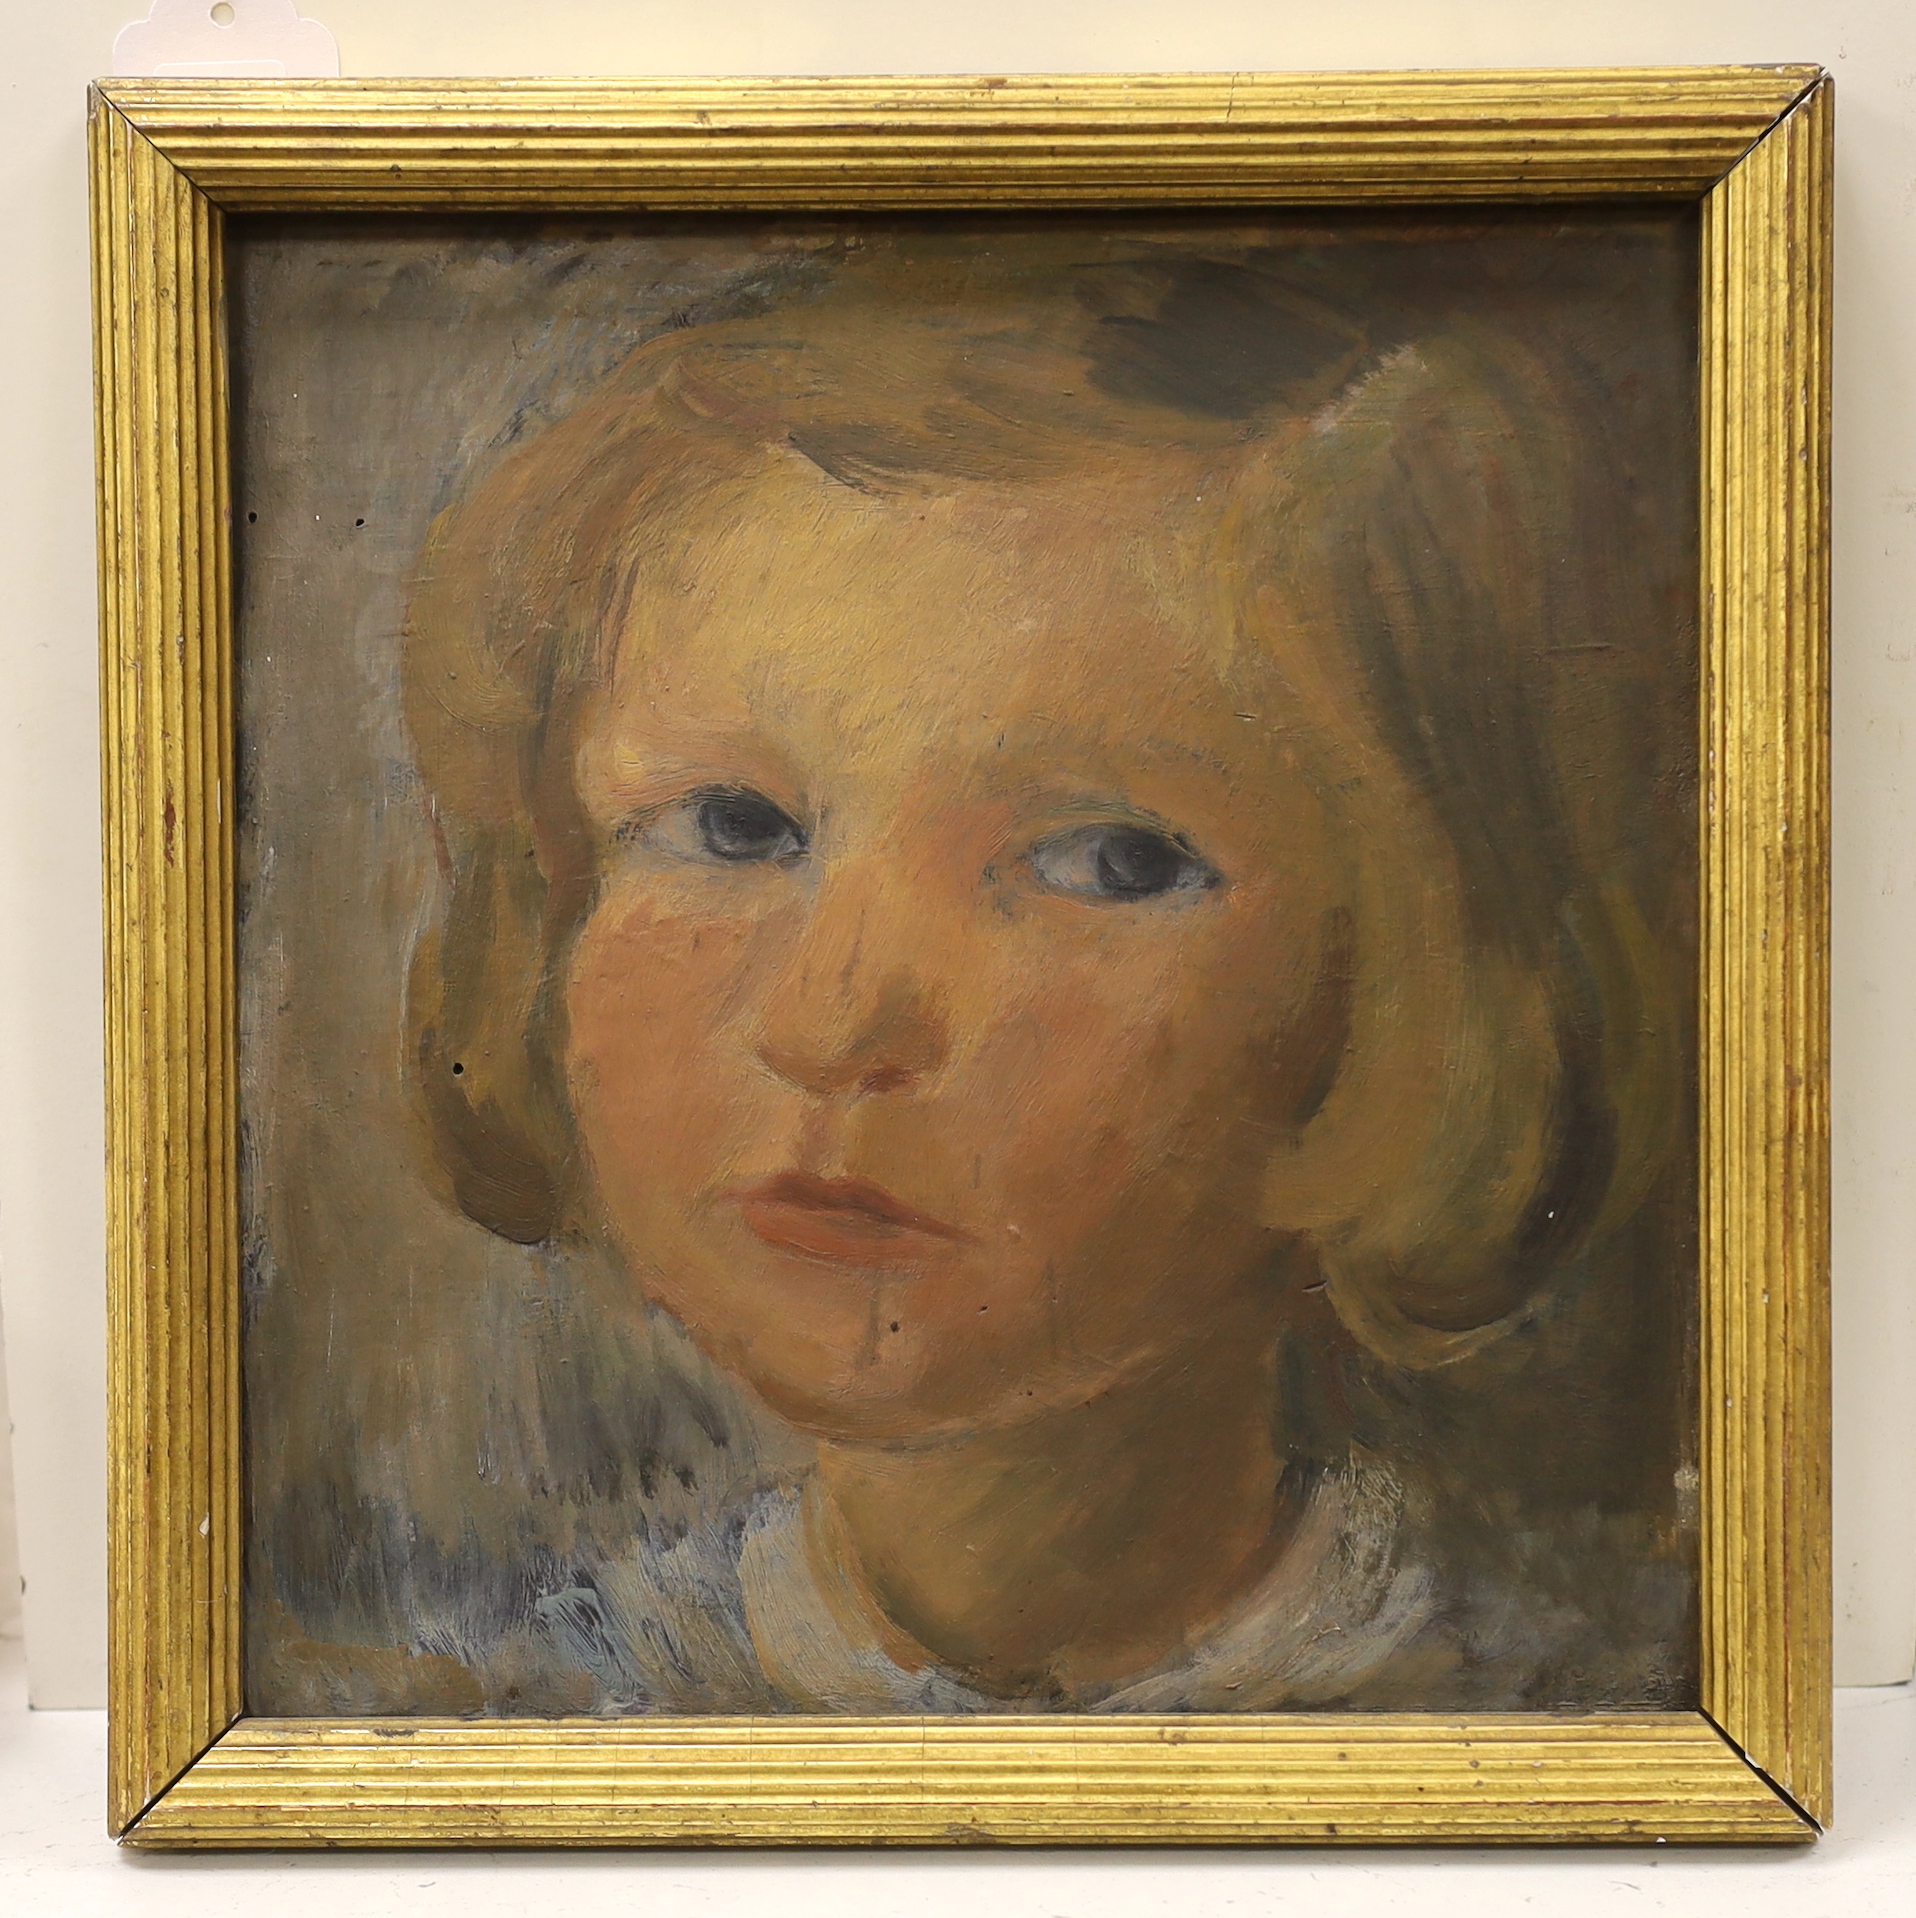 20th century School, oil on board, Portrait of a young girl, unsigned, 25 x 24cm